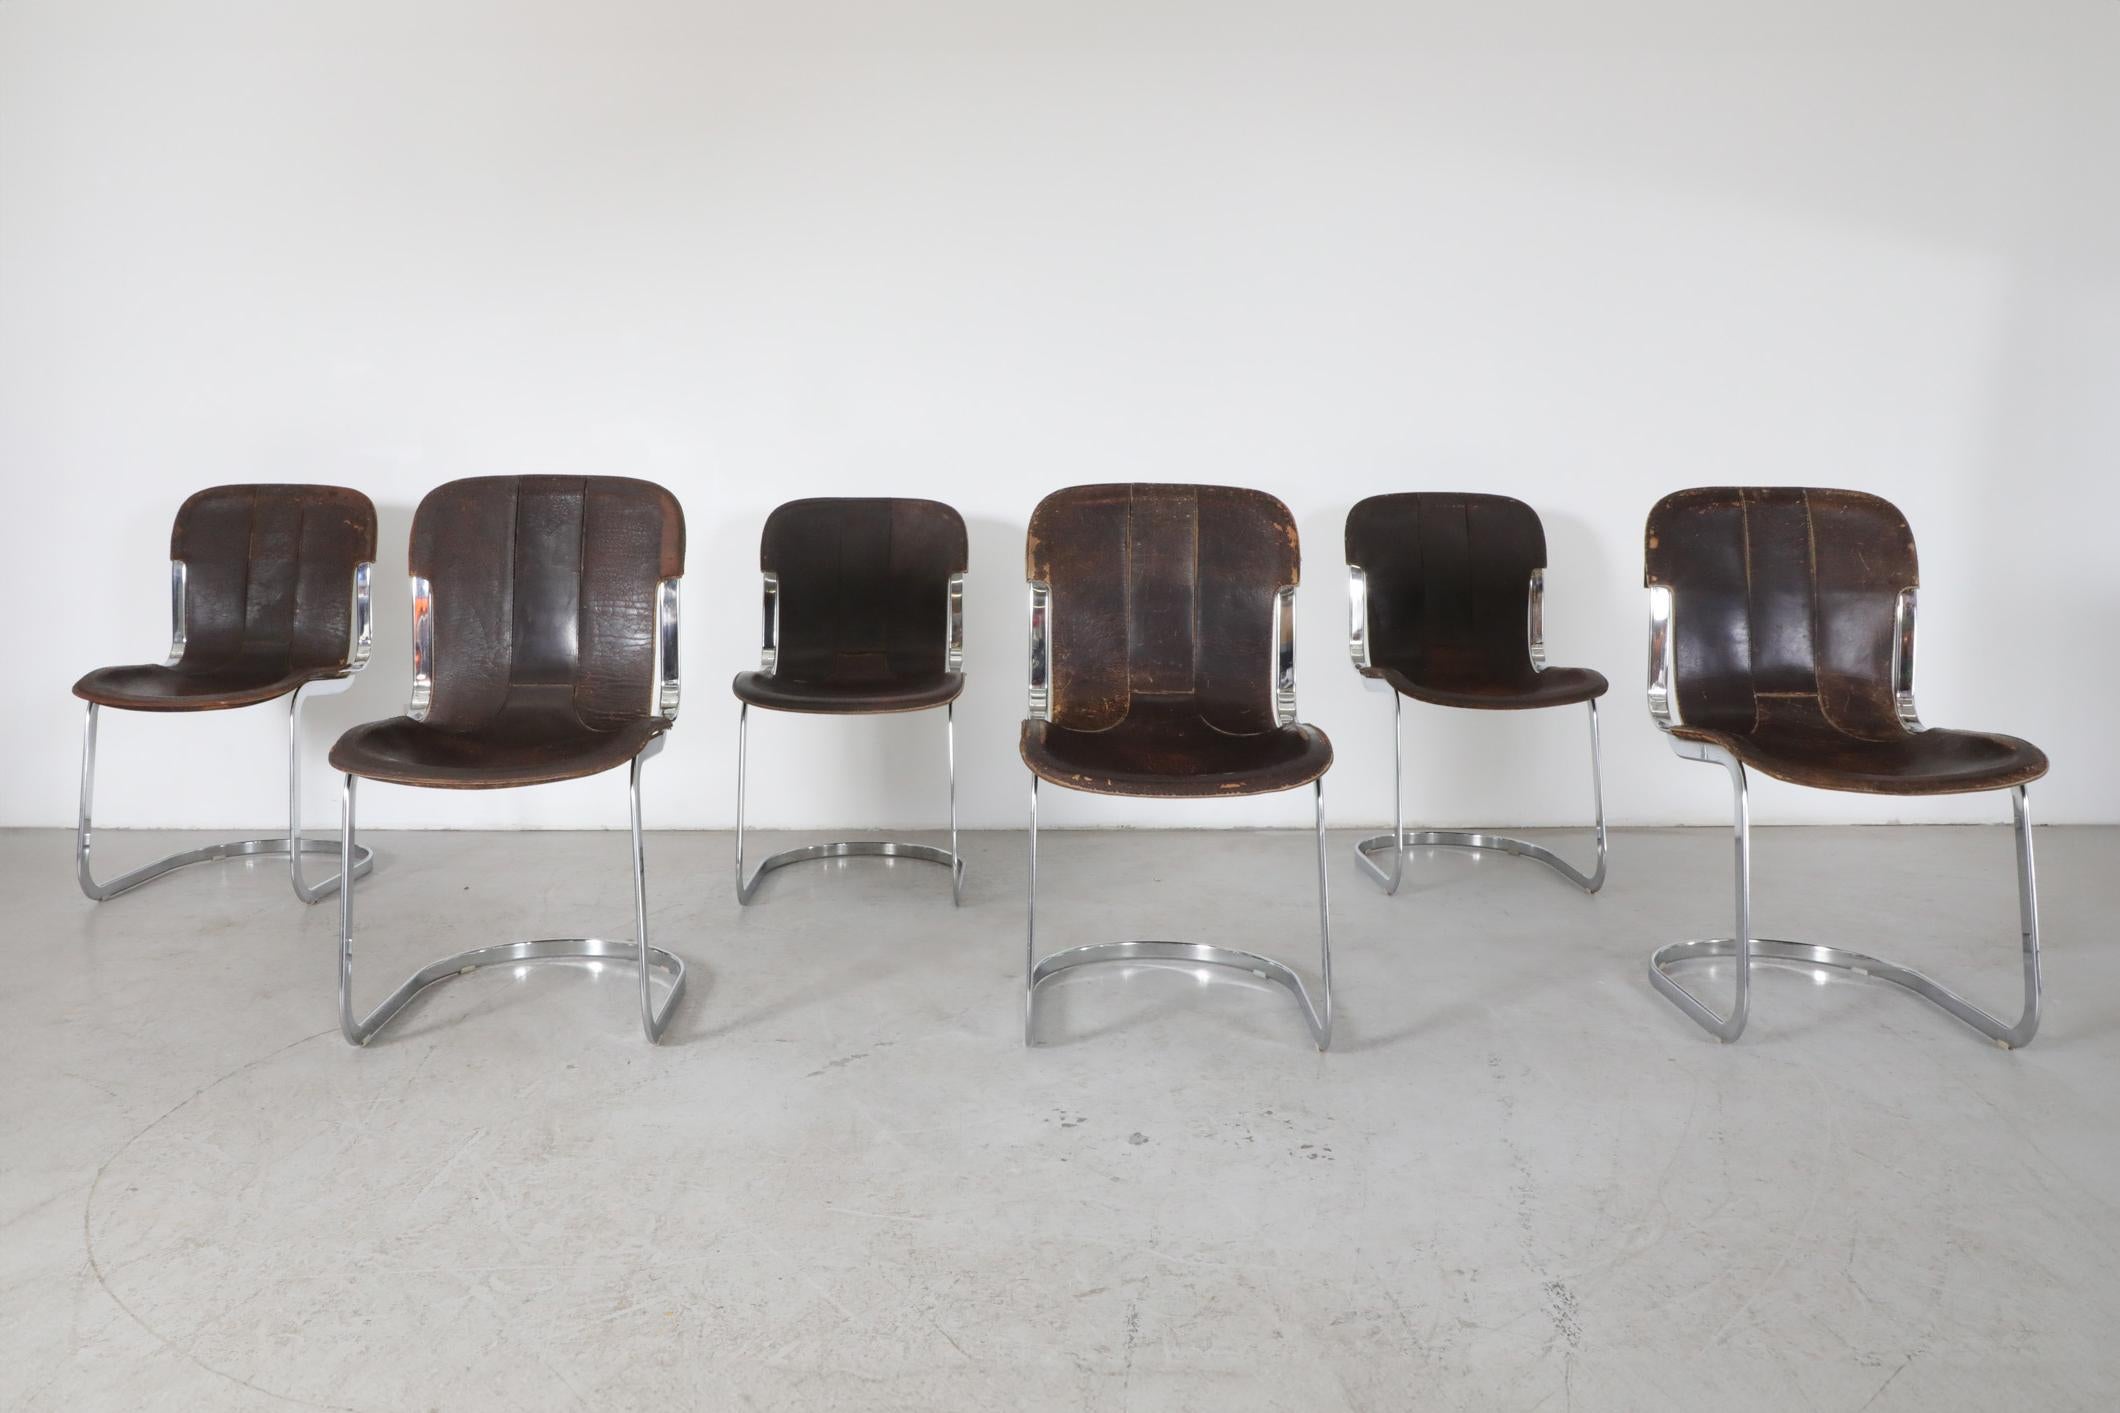 Mid-Century, late nineteen sixties, chrome and leather, cantilevered chairs by Italian designer and photographer Willy Rizzo for famed manufacturer Cidue. In original condition with visible wear and heavy patina, consistent with their age and use.